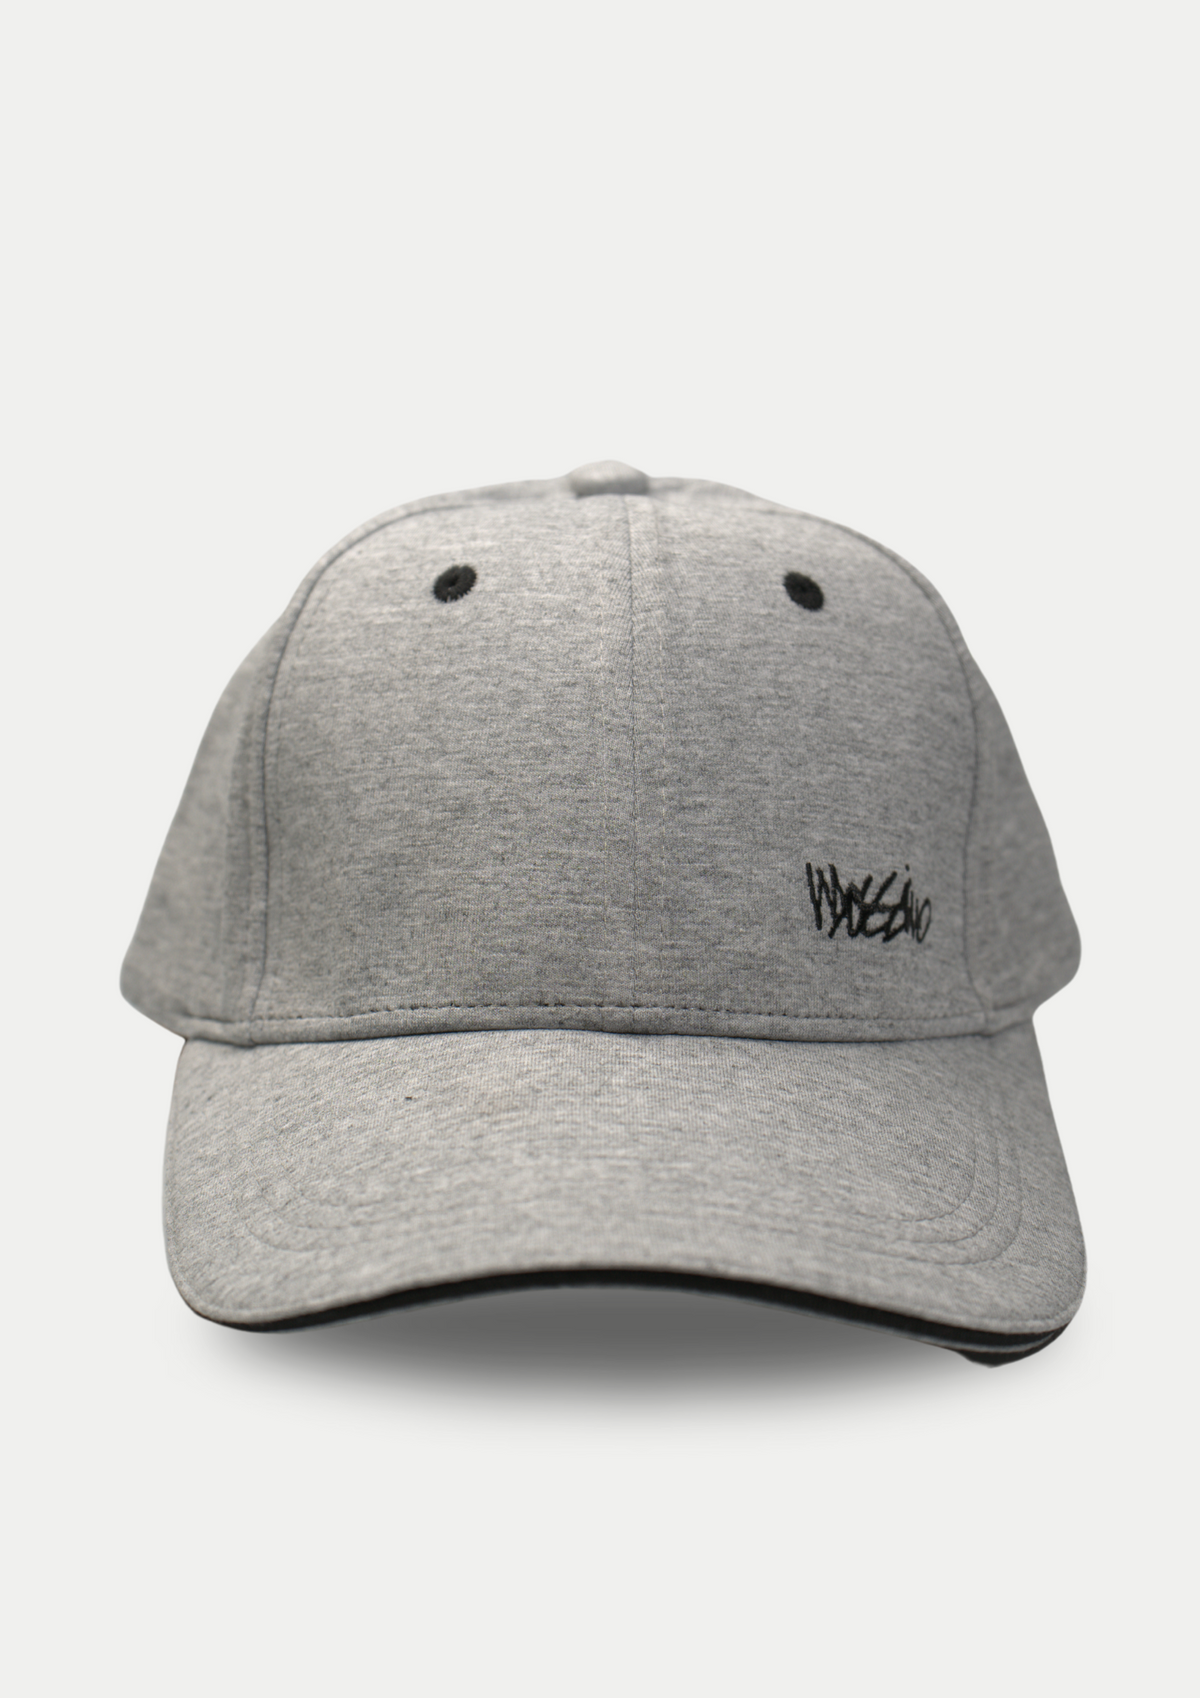 Mossimo Heather Gray Baseball Cap with Embroidery